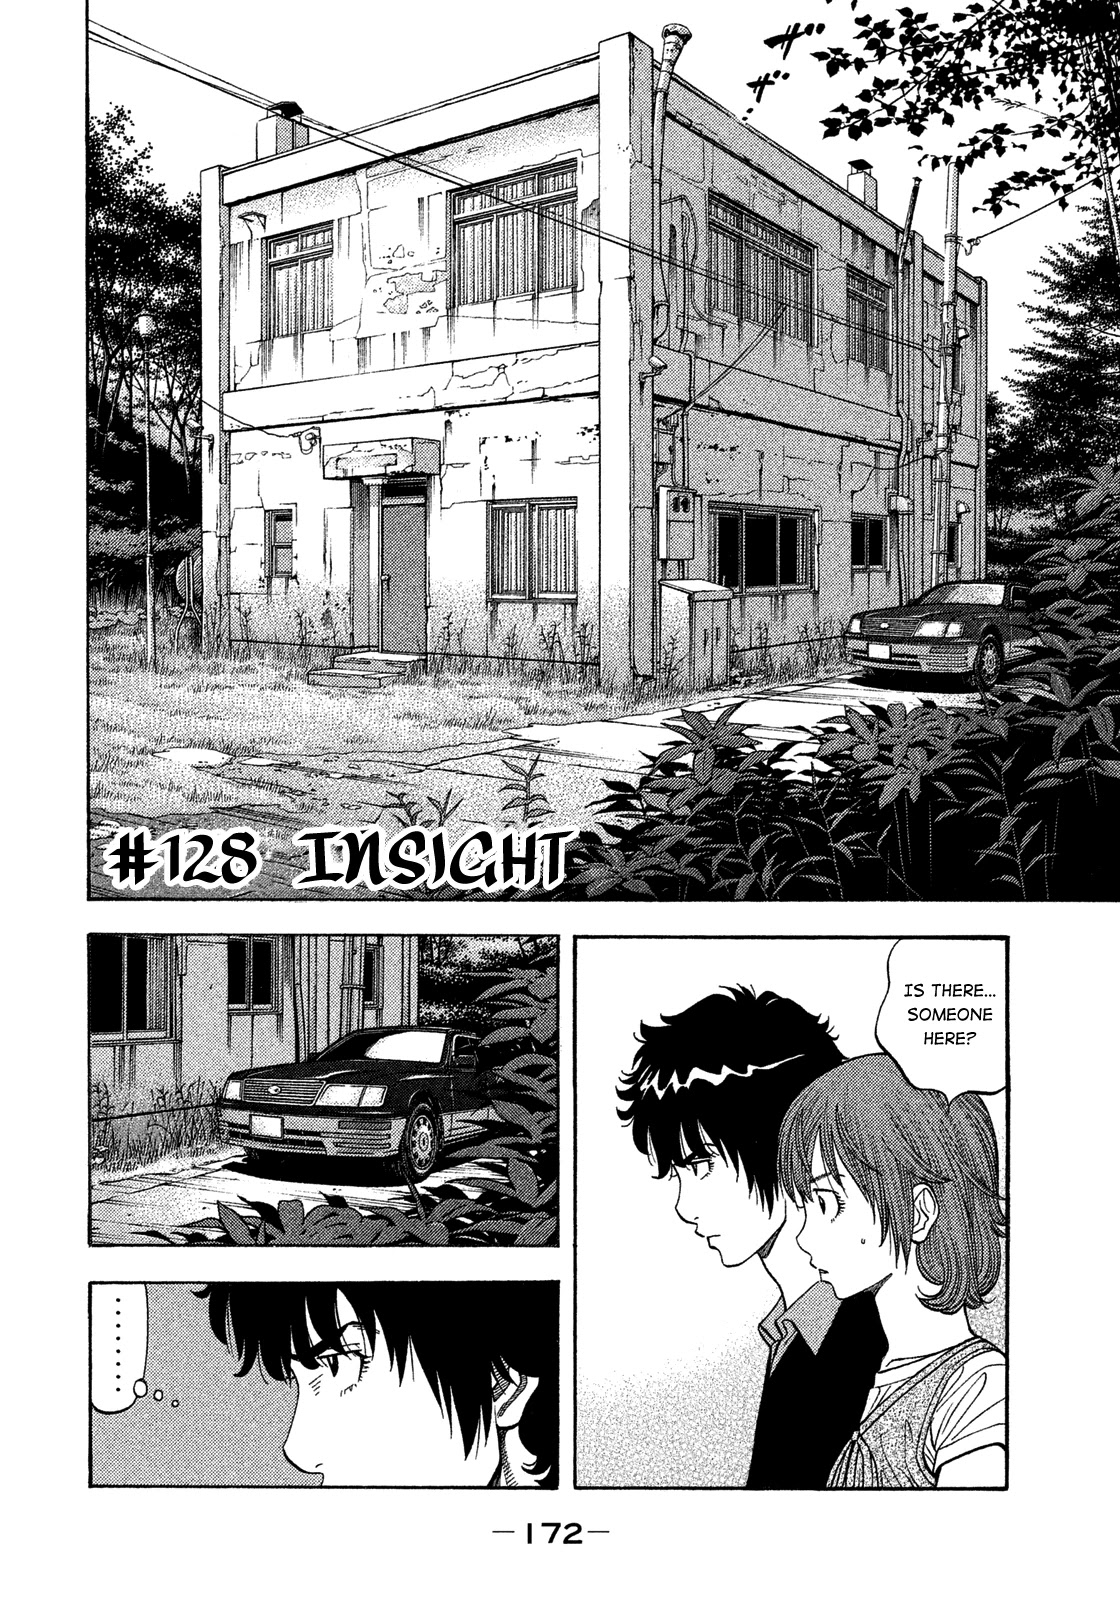 Montage (Watanabe Jun) Chapter 128: Insight - Picture 2